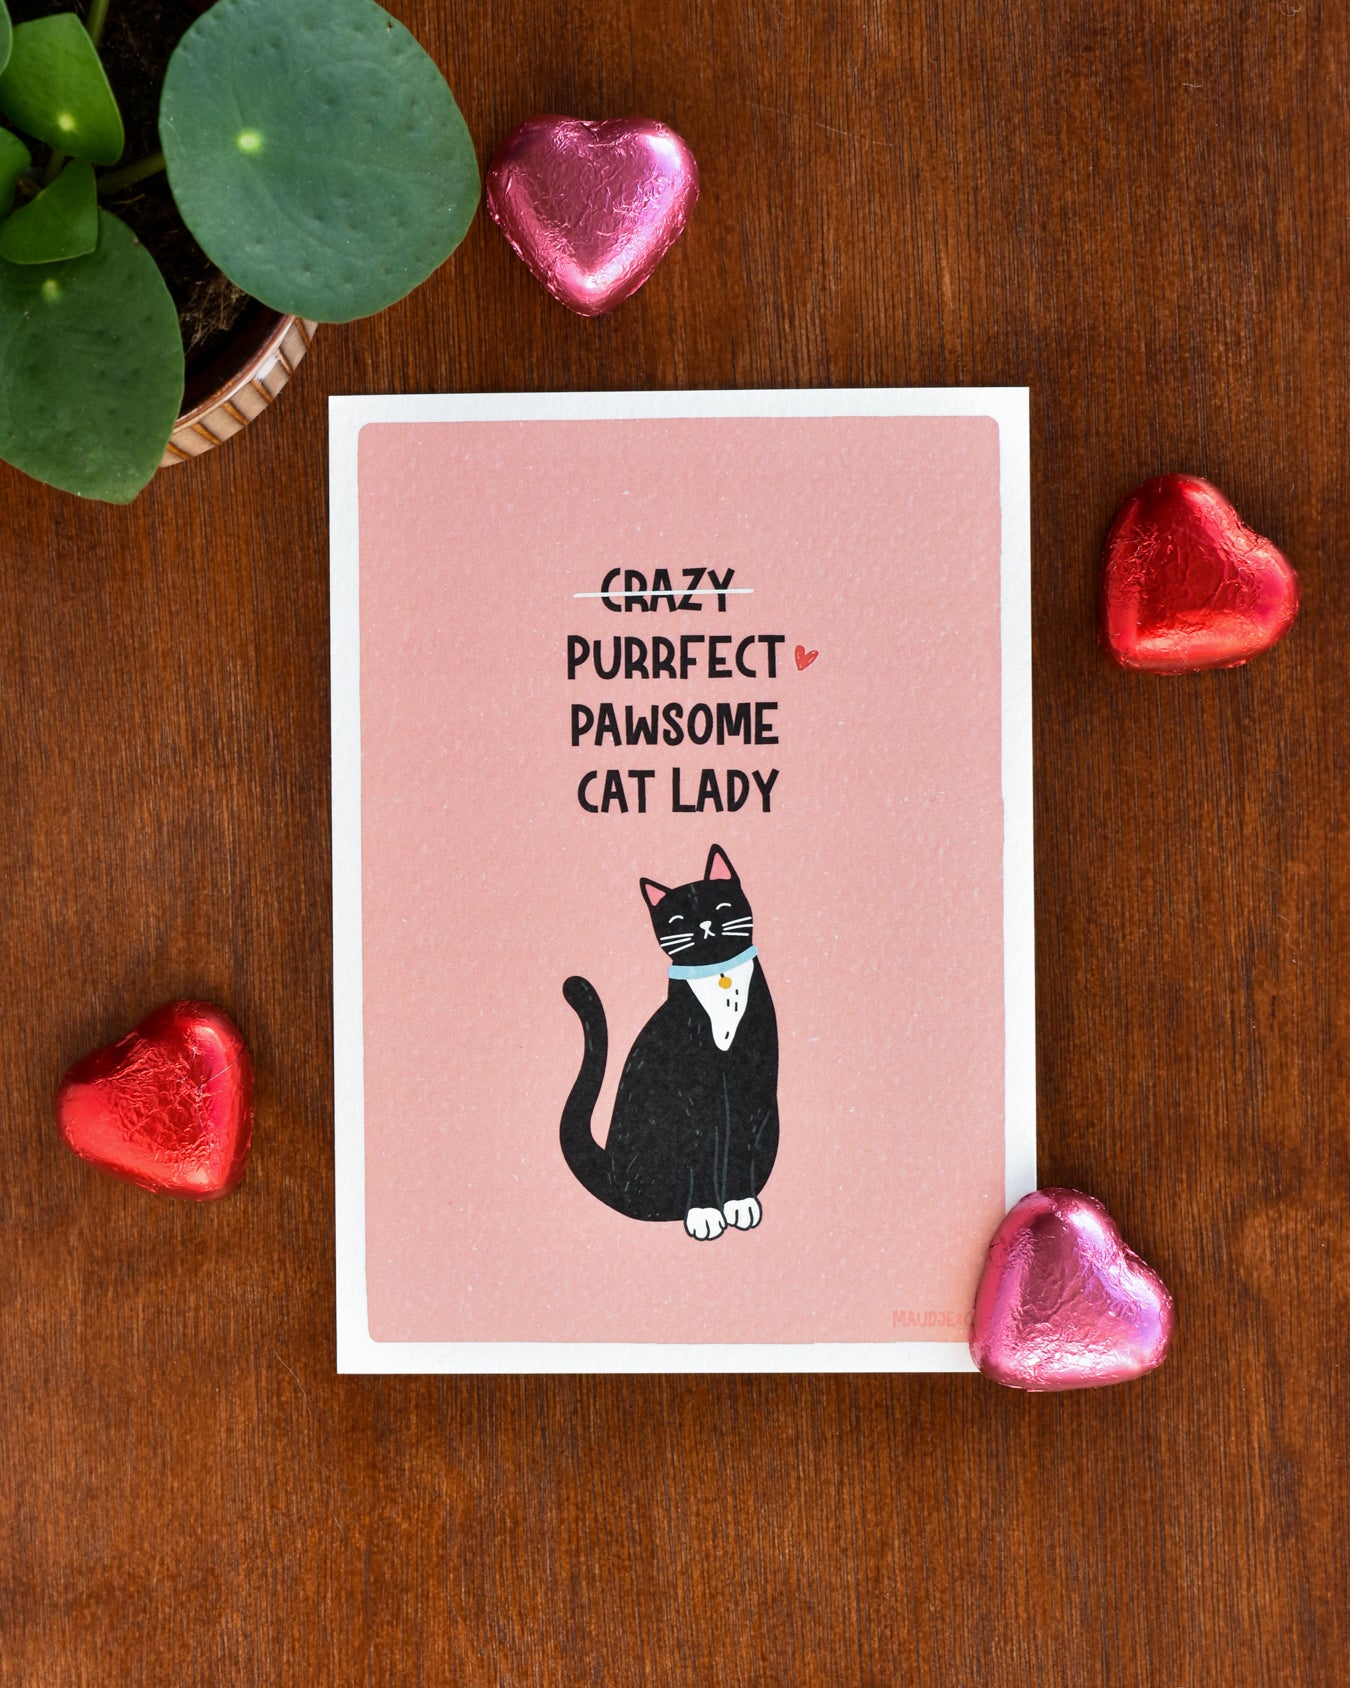 Purrfect pawsome cat lady